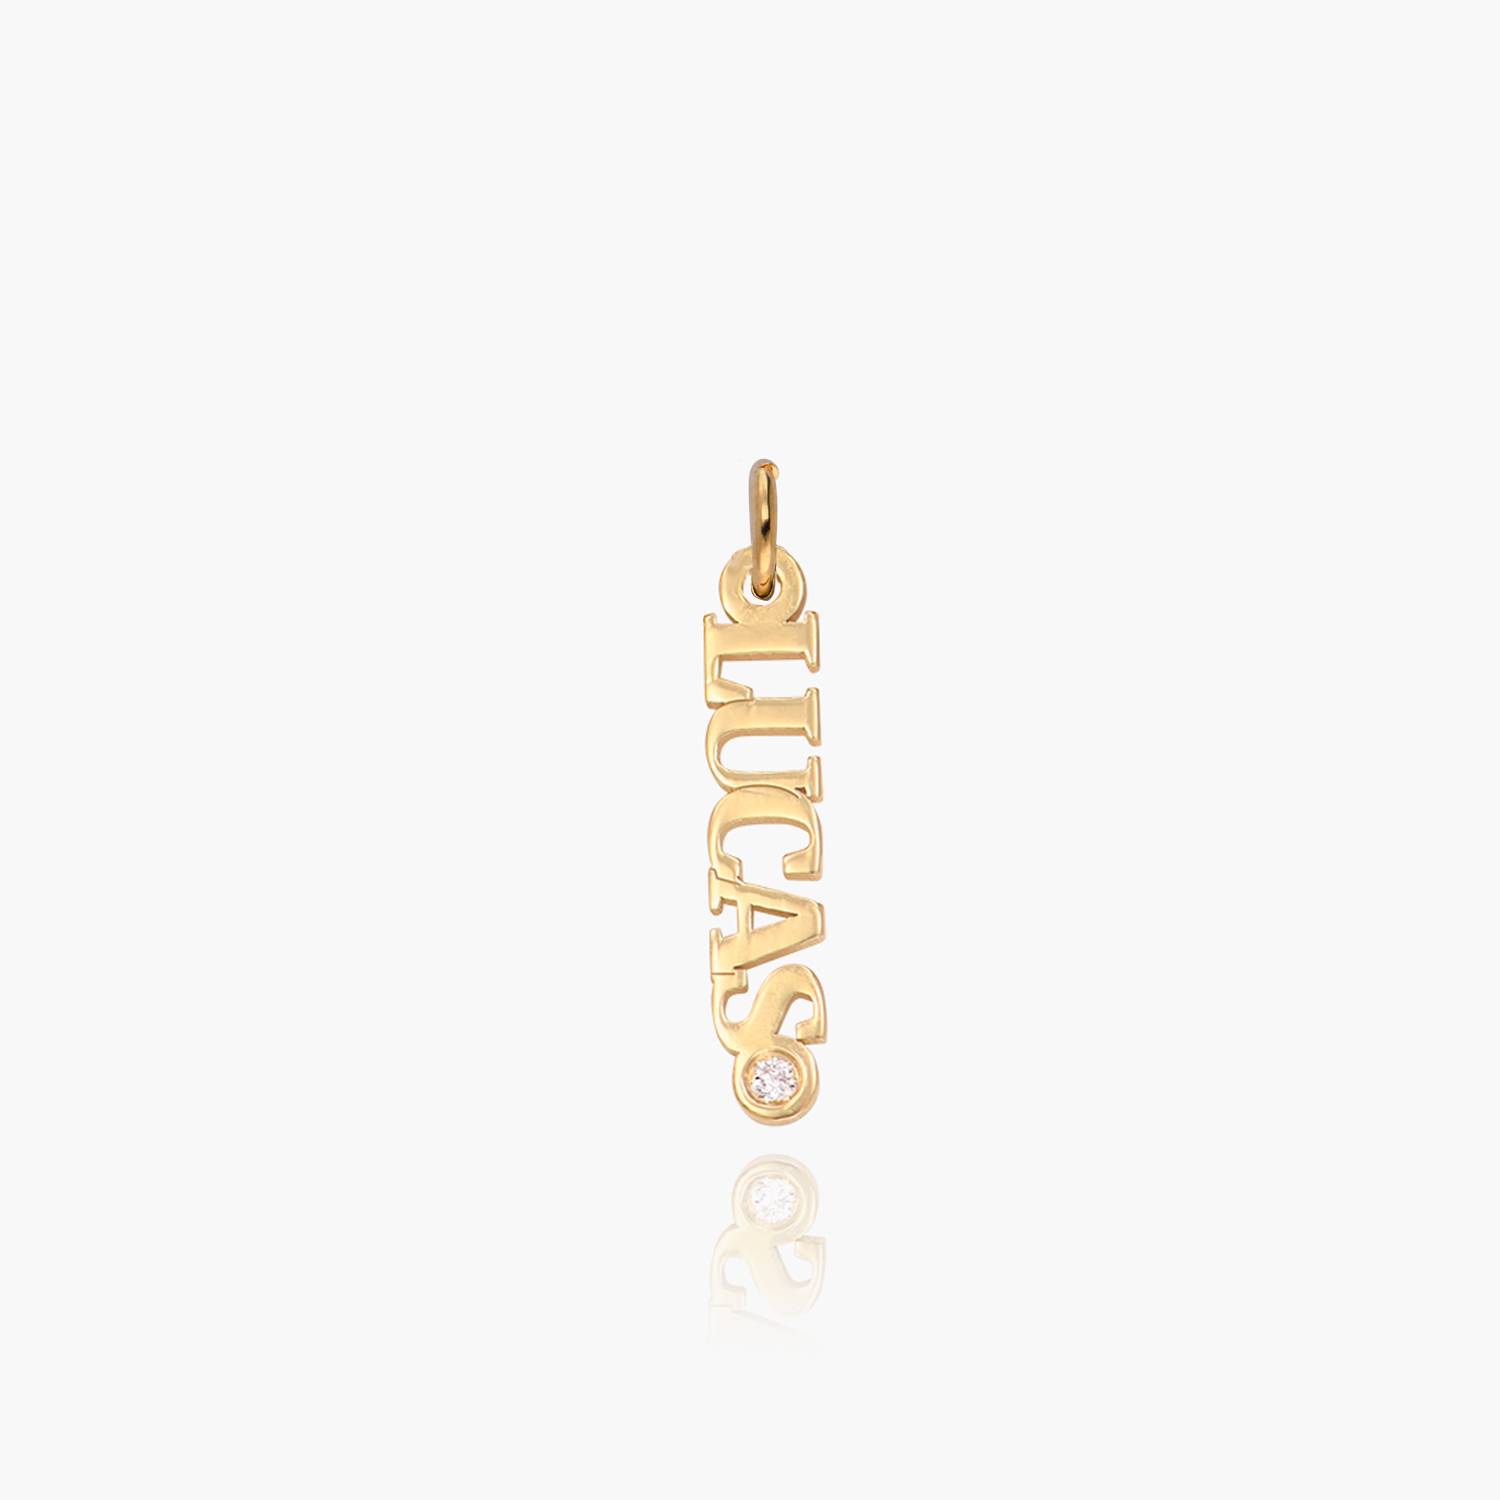 EXTRA Personalized Name Charm with Diamonds- 14k Solid Gold